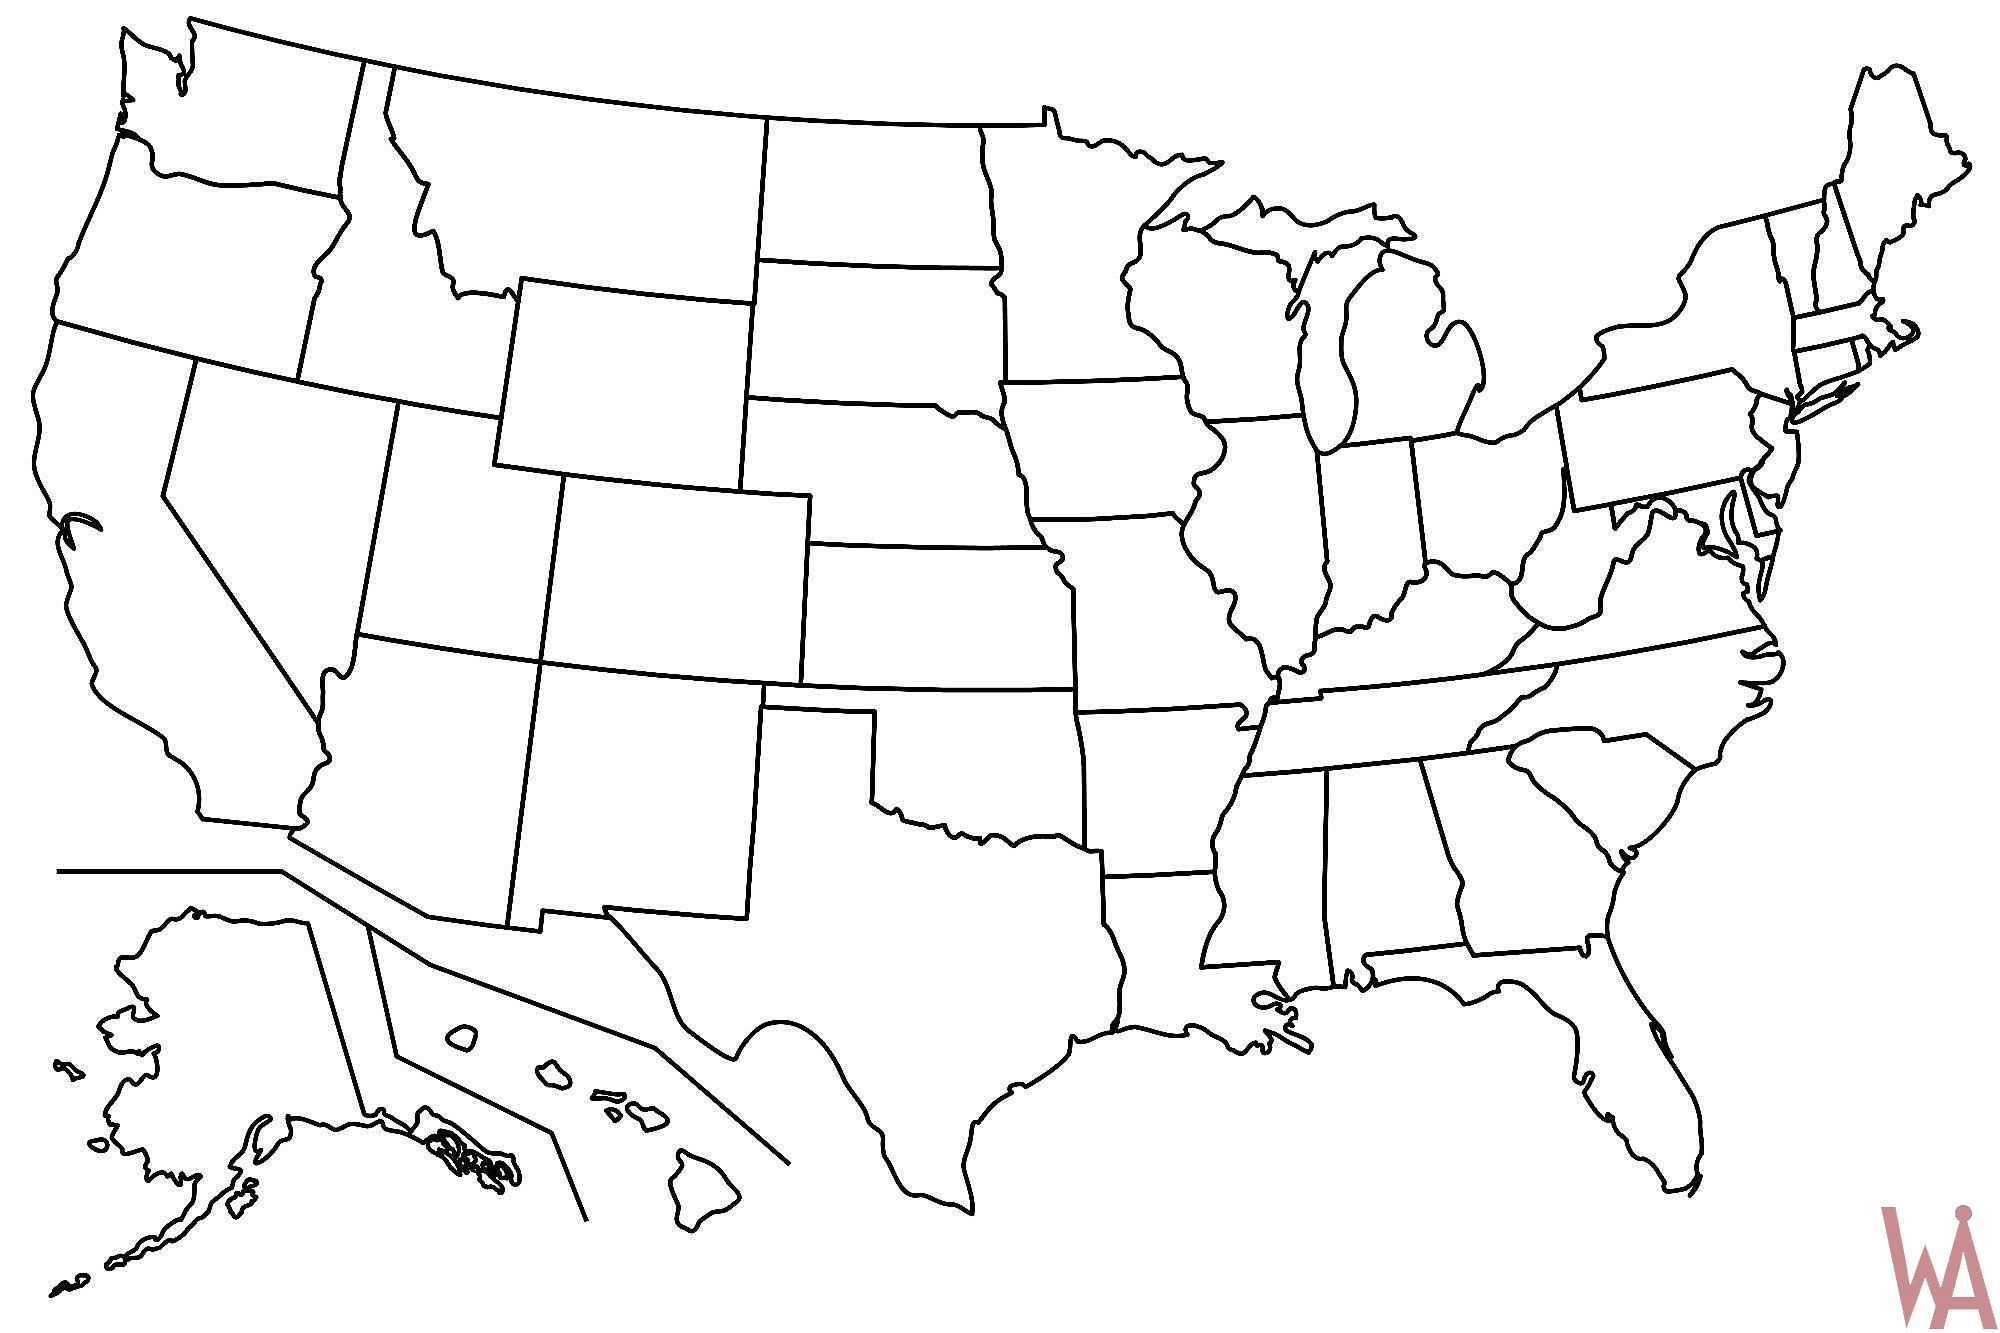 Blank Outline Map of the United States And Canada